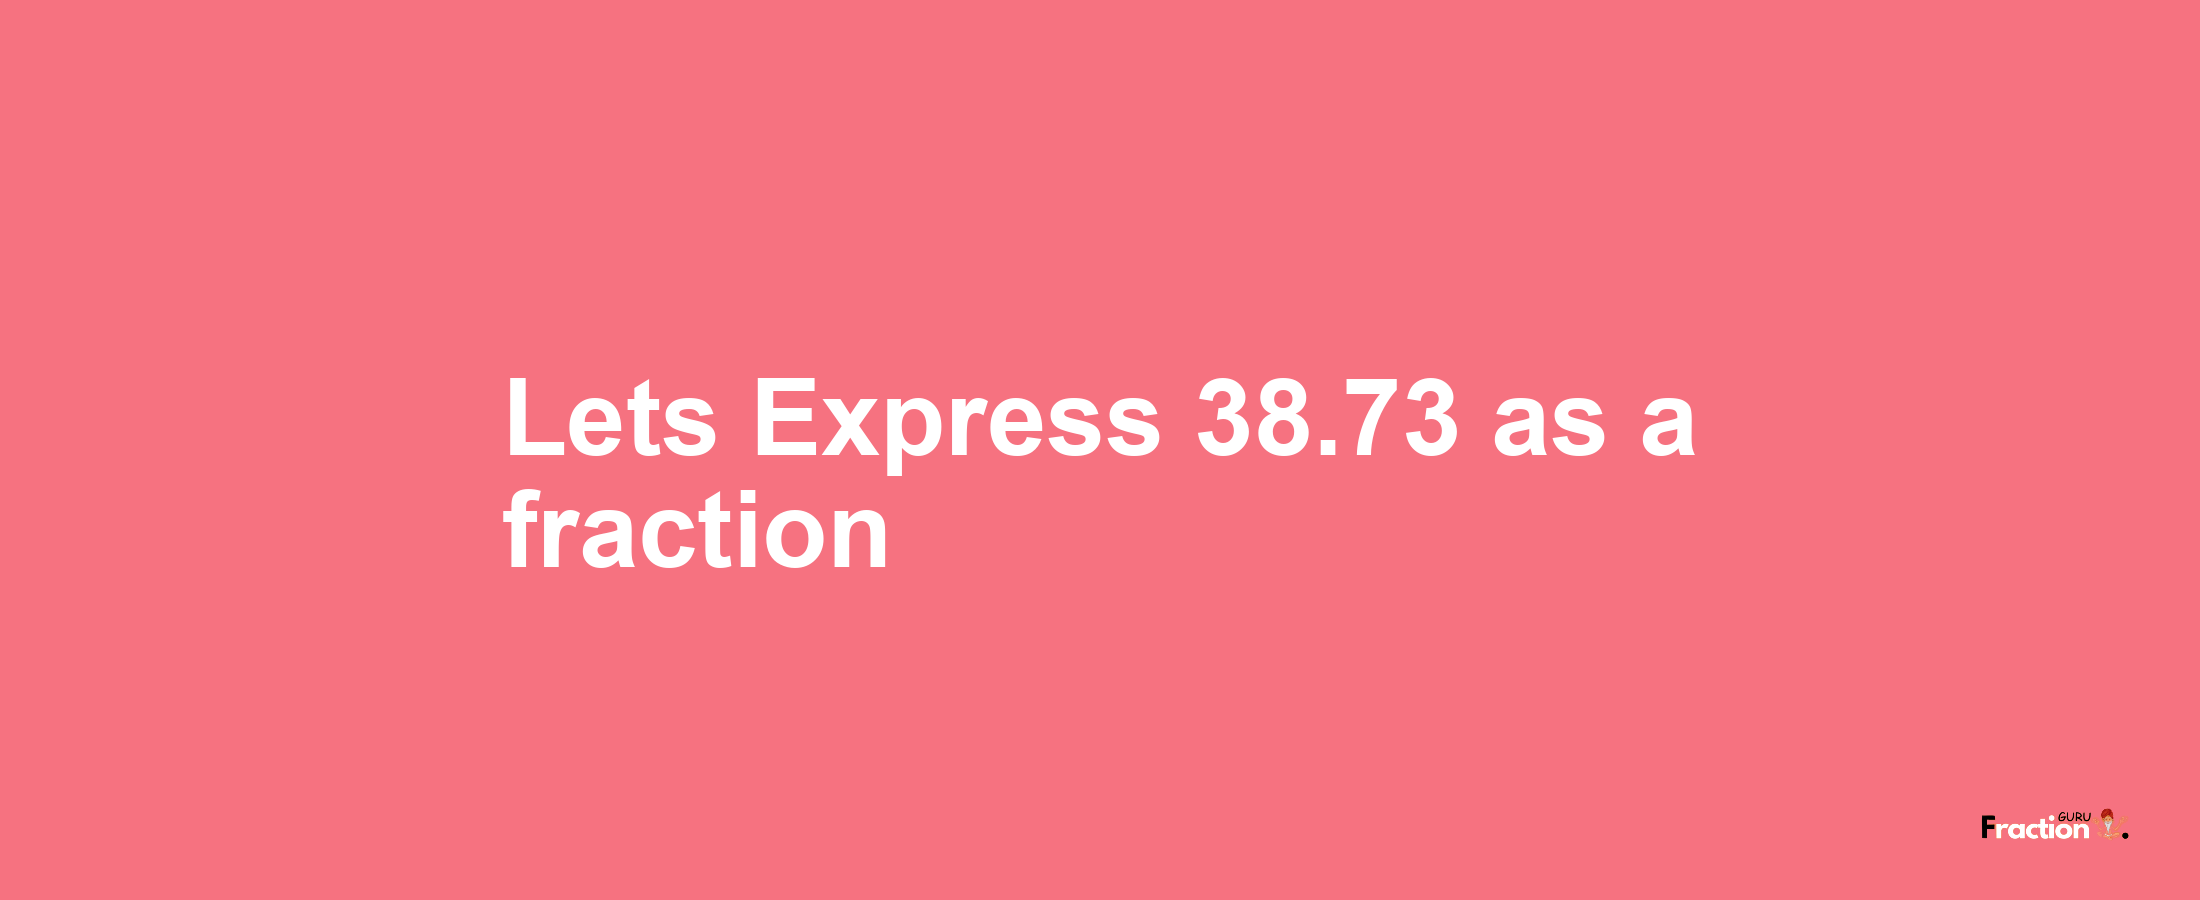 Lets Express 38.73 as afraction